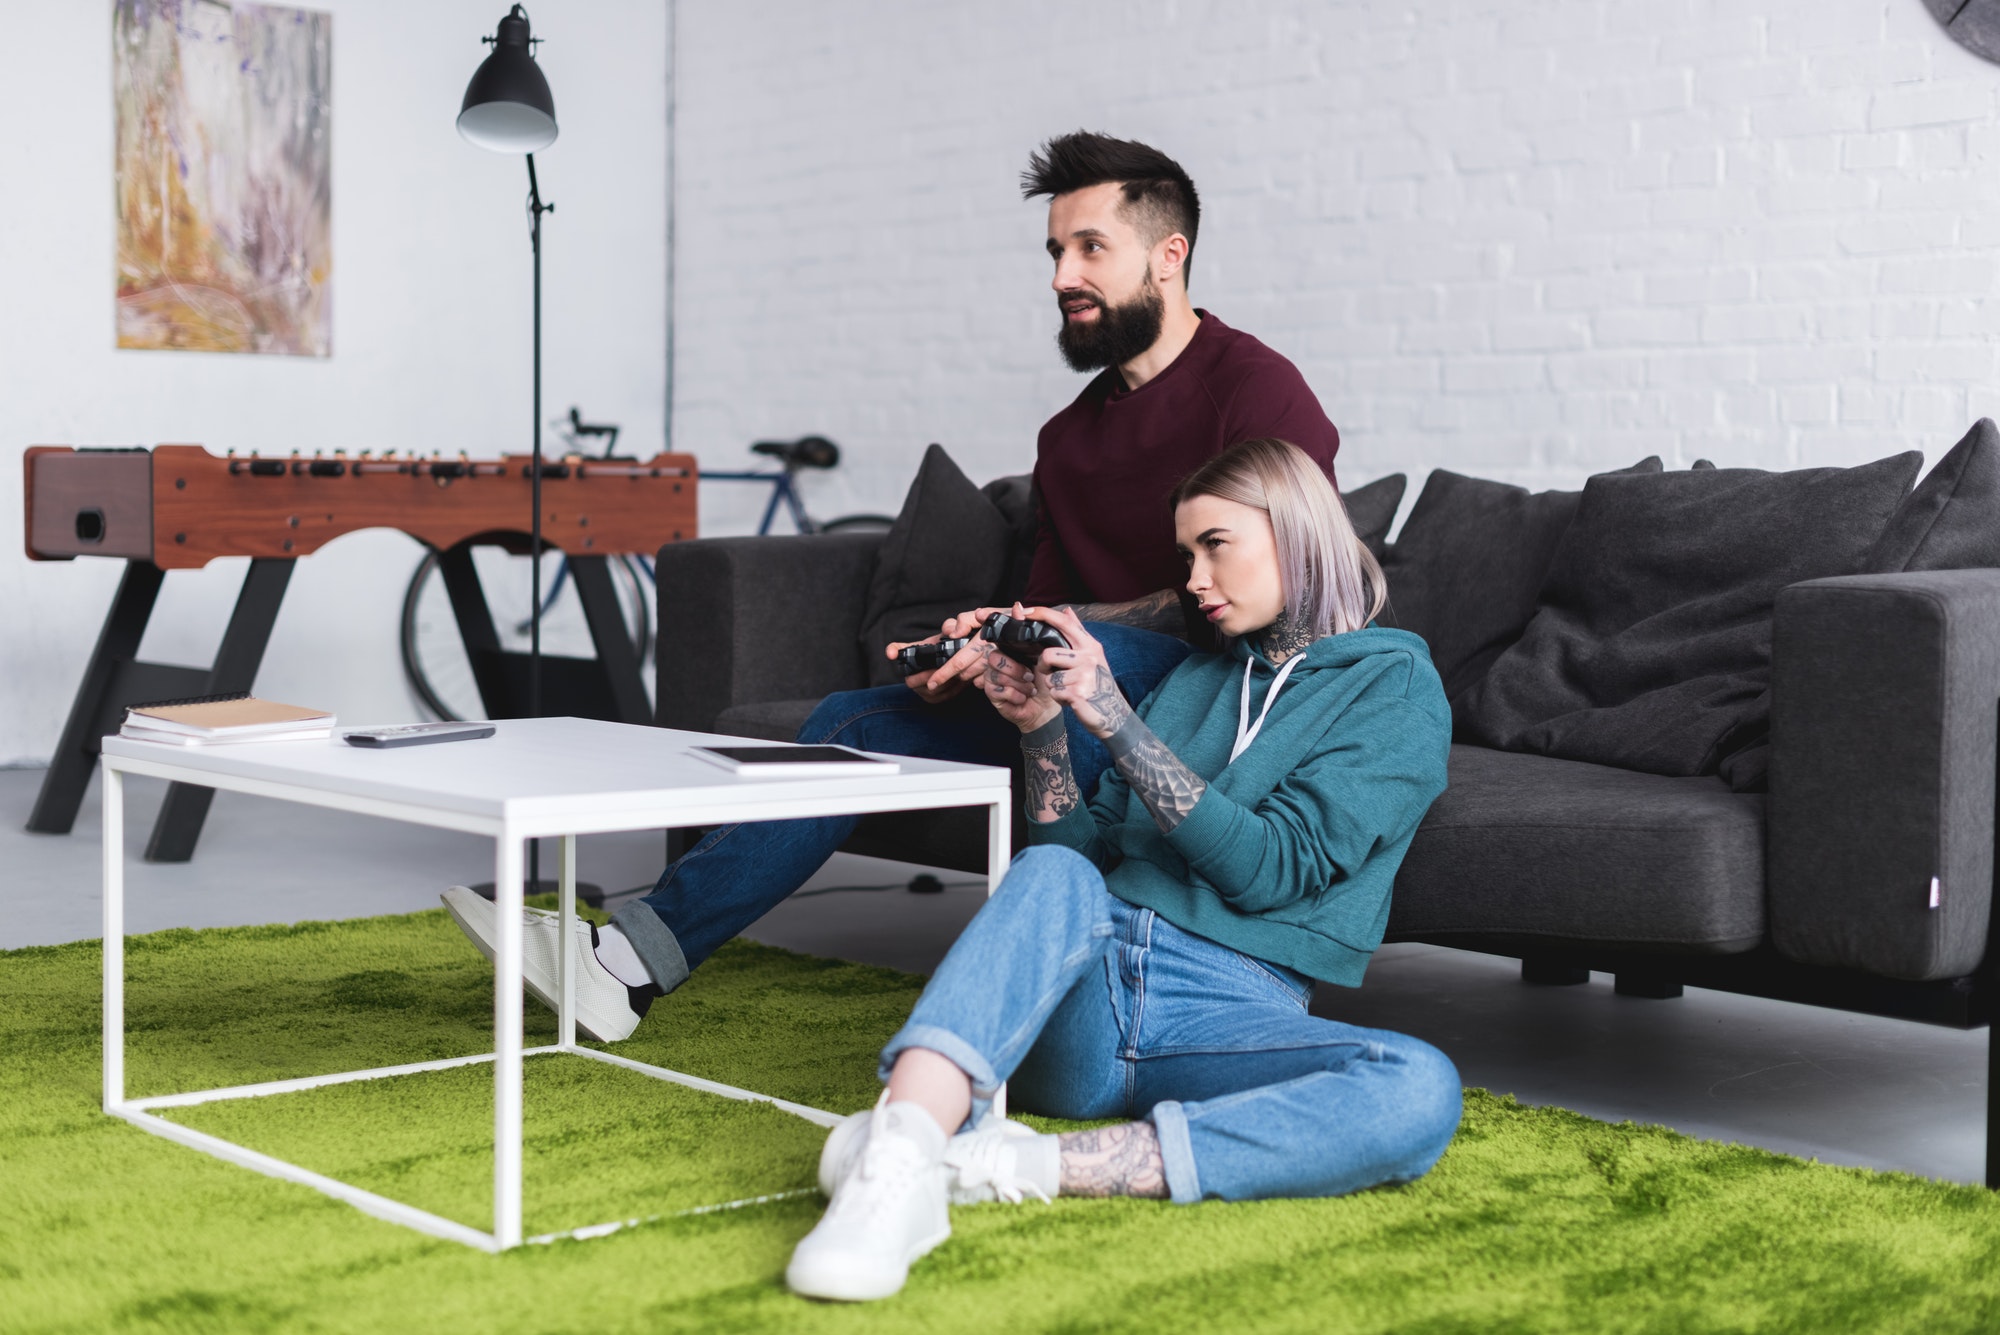 tattooed couple playing video game in living room